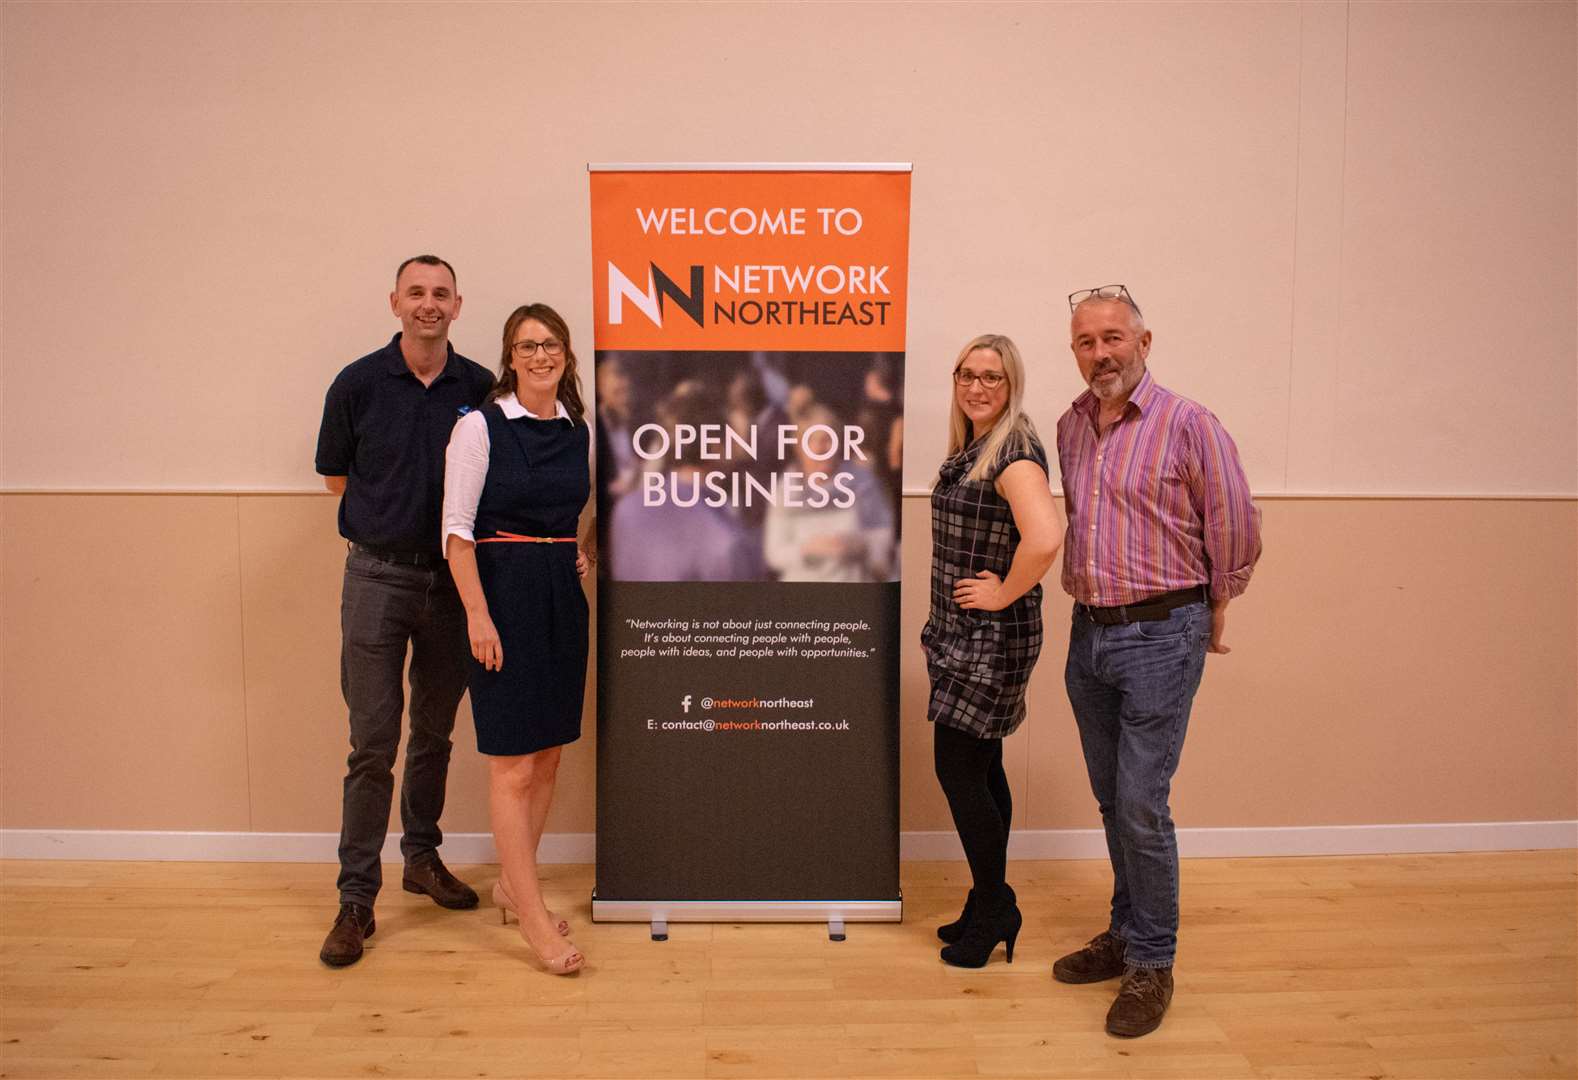 Network NorthEast sees Neil McLeod of Property Partners join Nicola Davidson and Victoria MacLachan from Optimul and Neil Haston of Haston Creative at the business meeting.